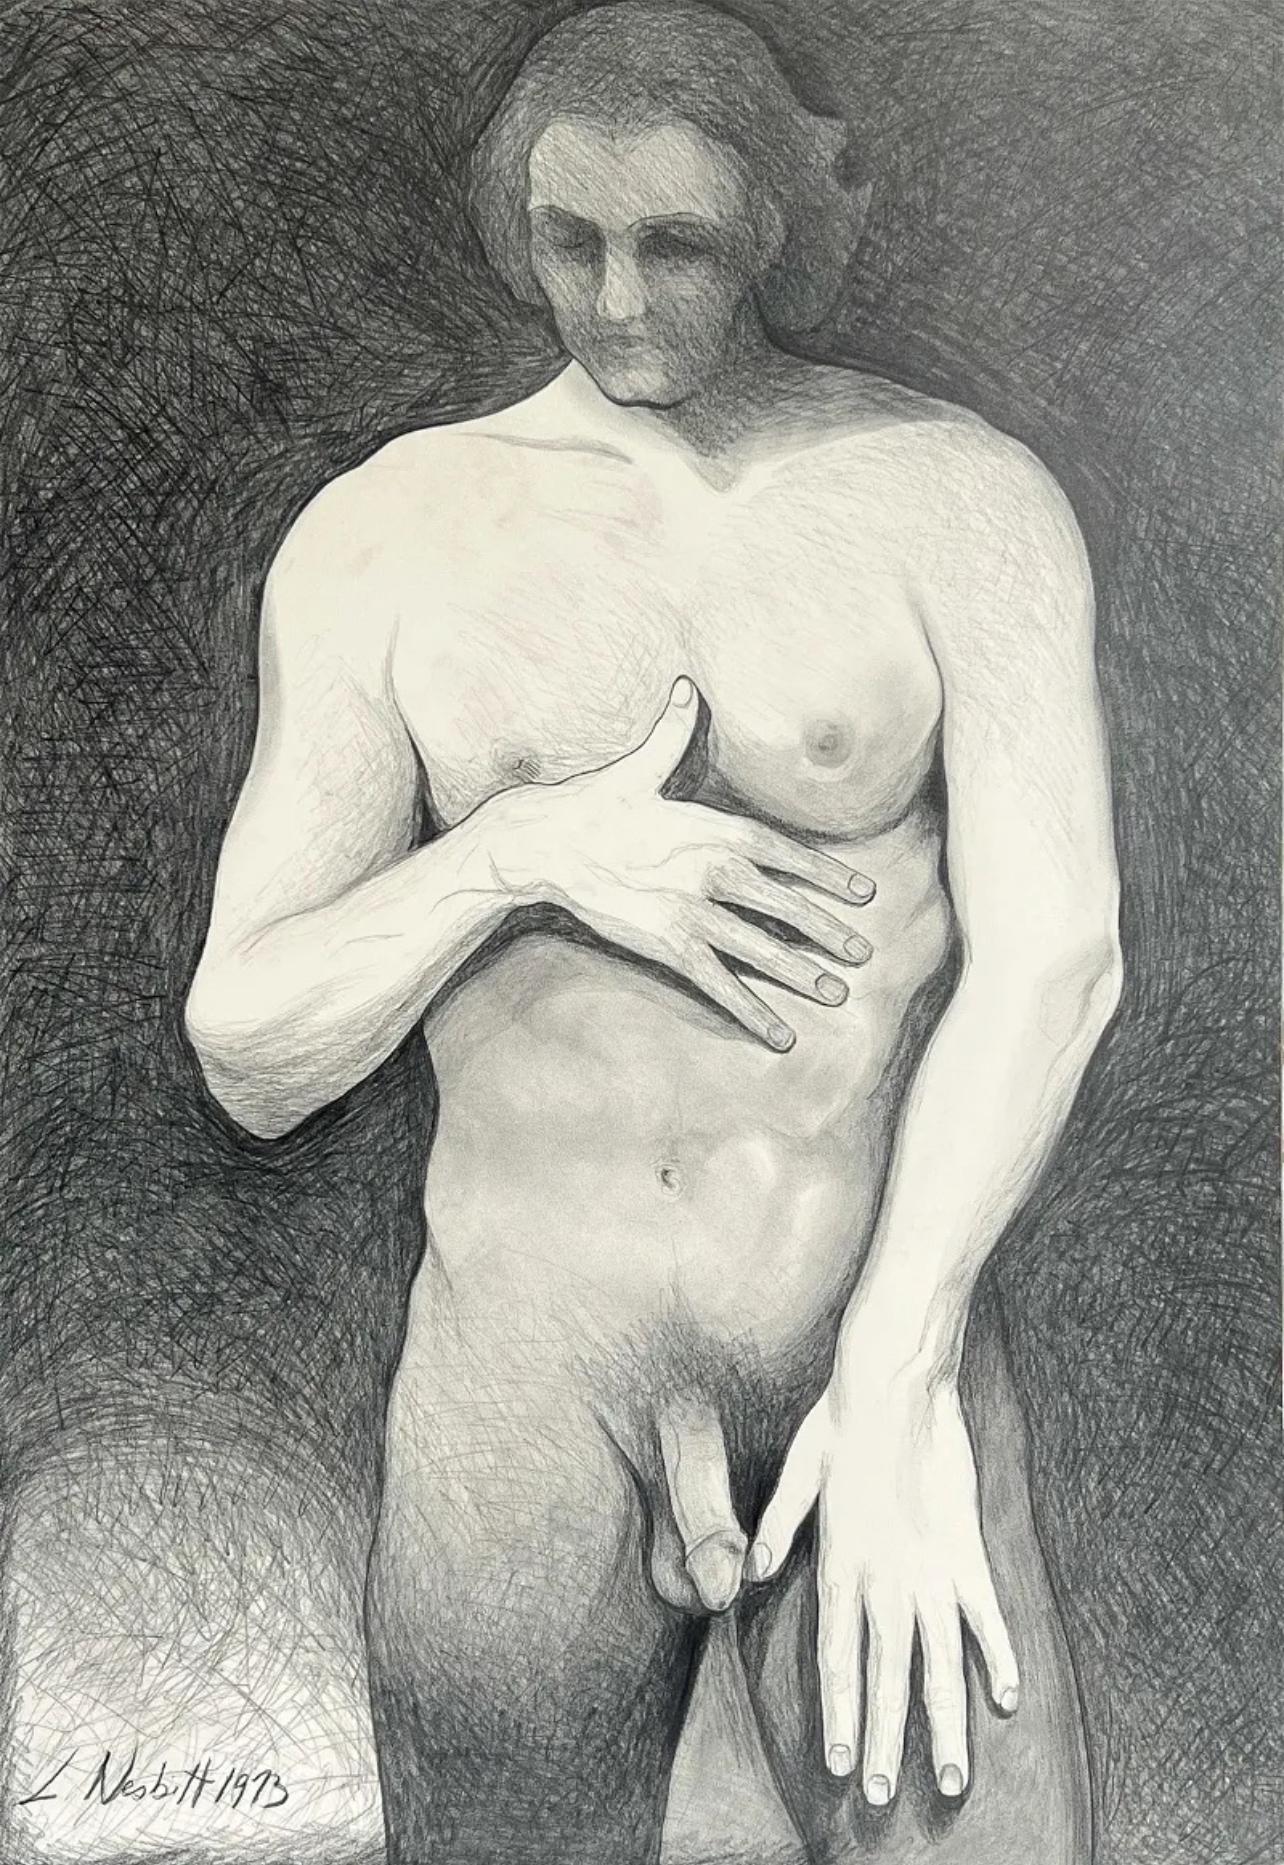 Artist: Lowell Nesbitt (1933-1993)
Title: (Male Nude) Untitled, 1973
Year: 1973
Medium: Graphite on Artist's Board
Size: 38.5 x 26.75 inches
Condition: Excellent
Inscription: Signed & dated in pencil

LOWELL NESBITT (1933-1993) One of the most